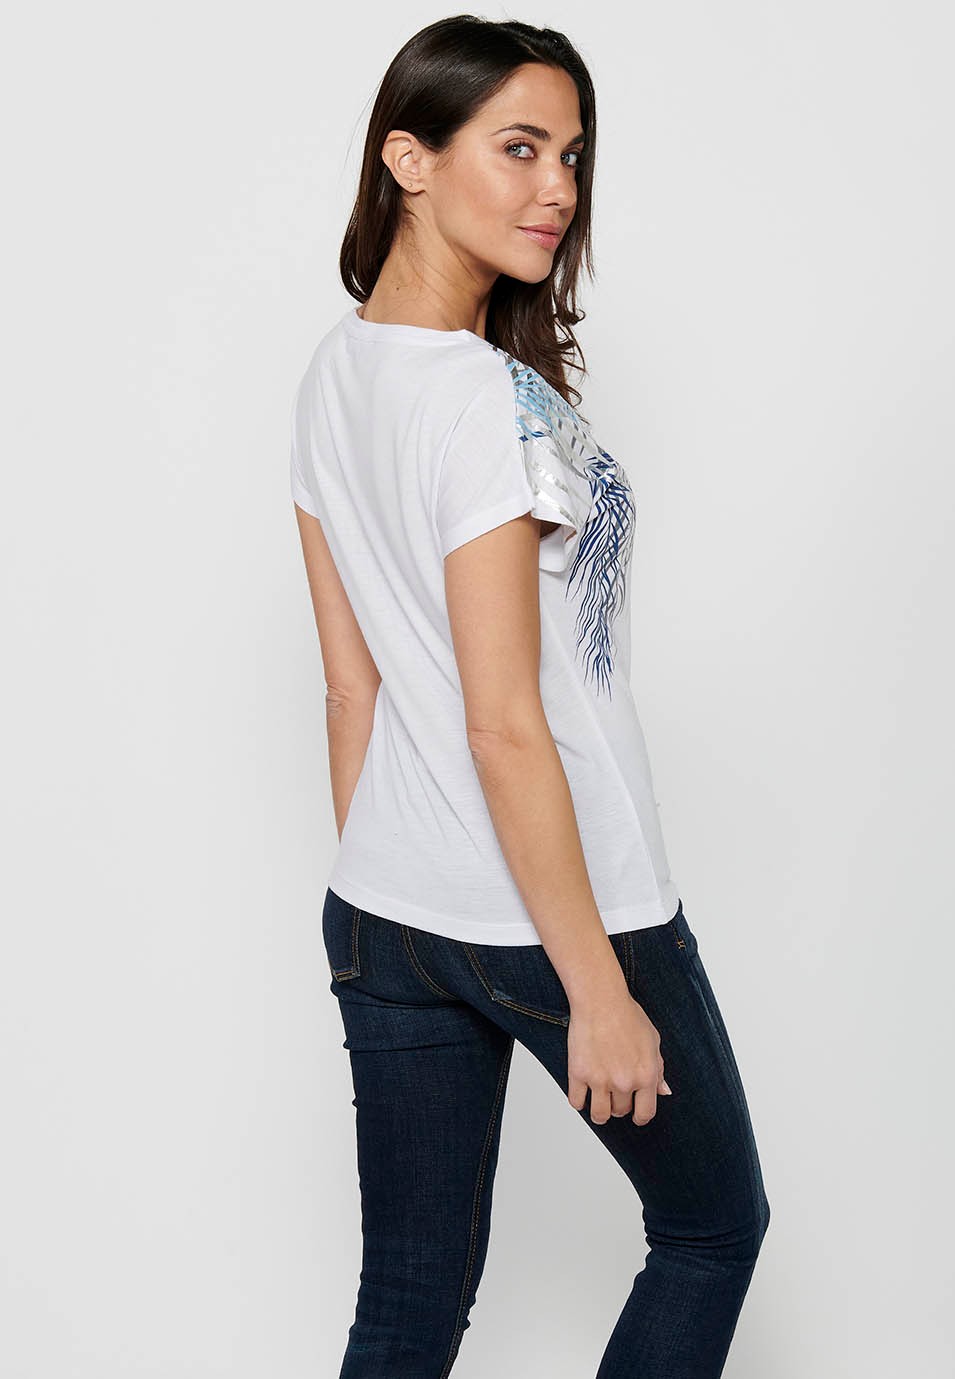 Women's White Round Neck Short Sleeve T-shirt with Front Print